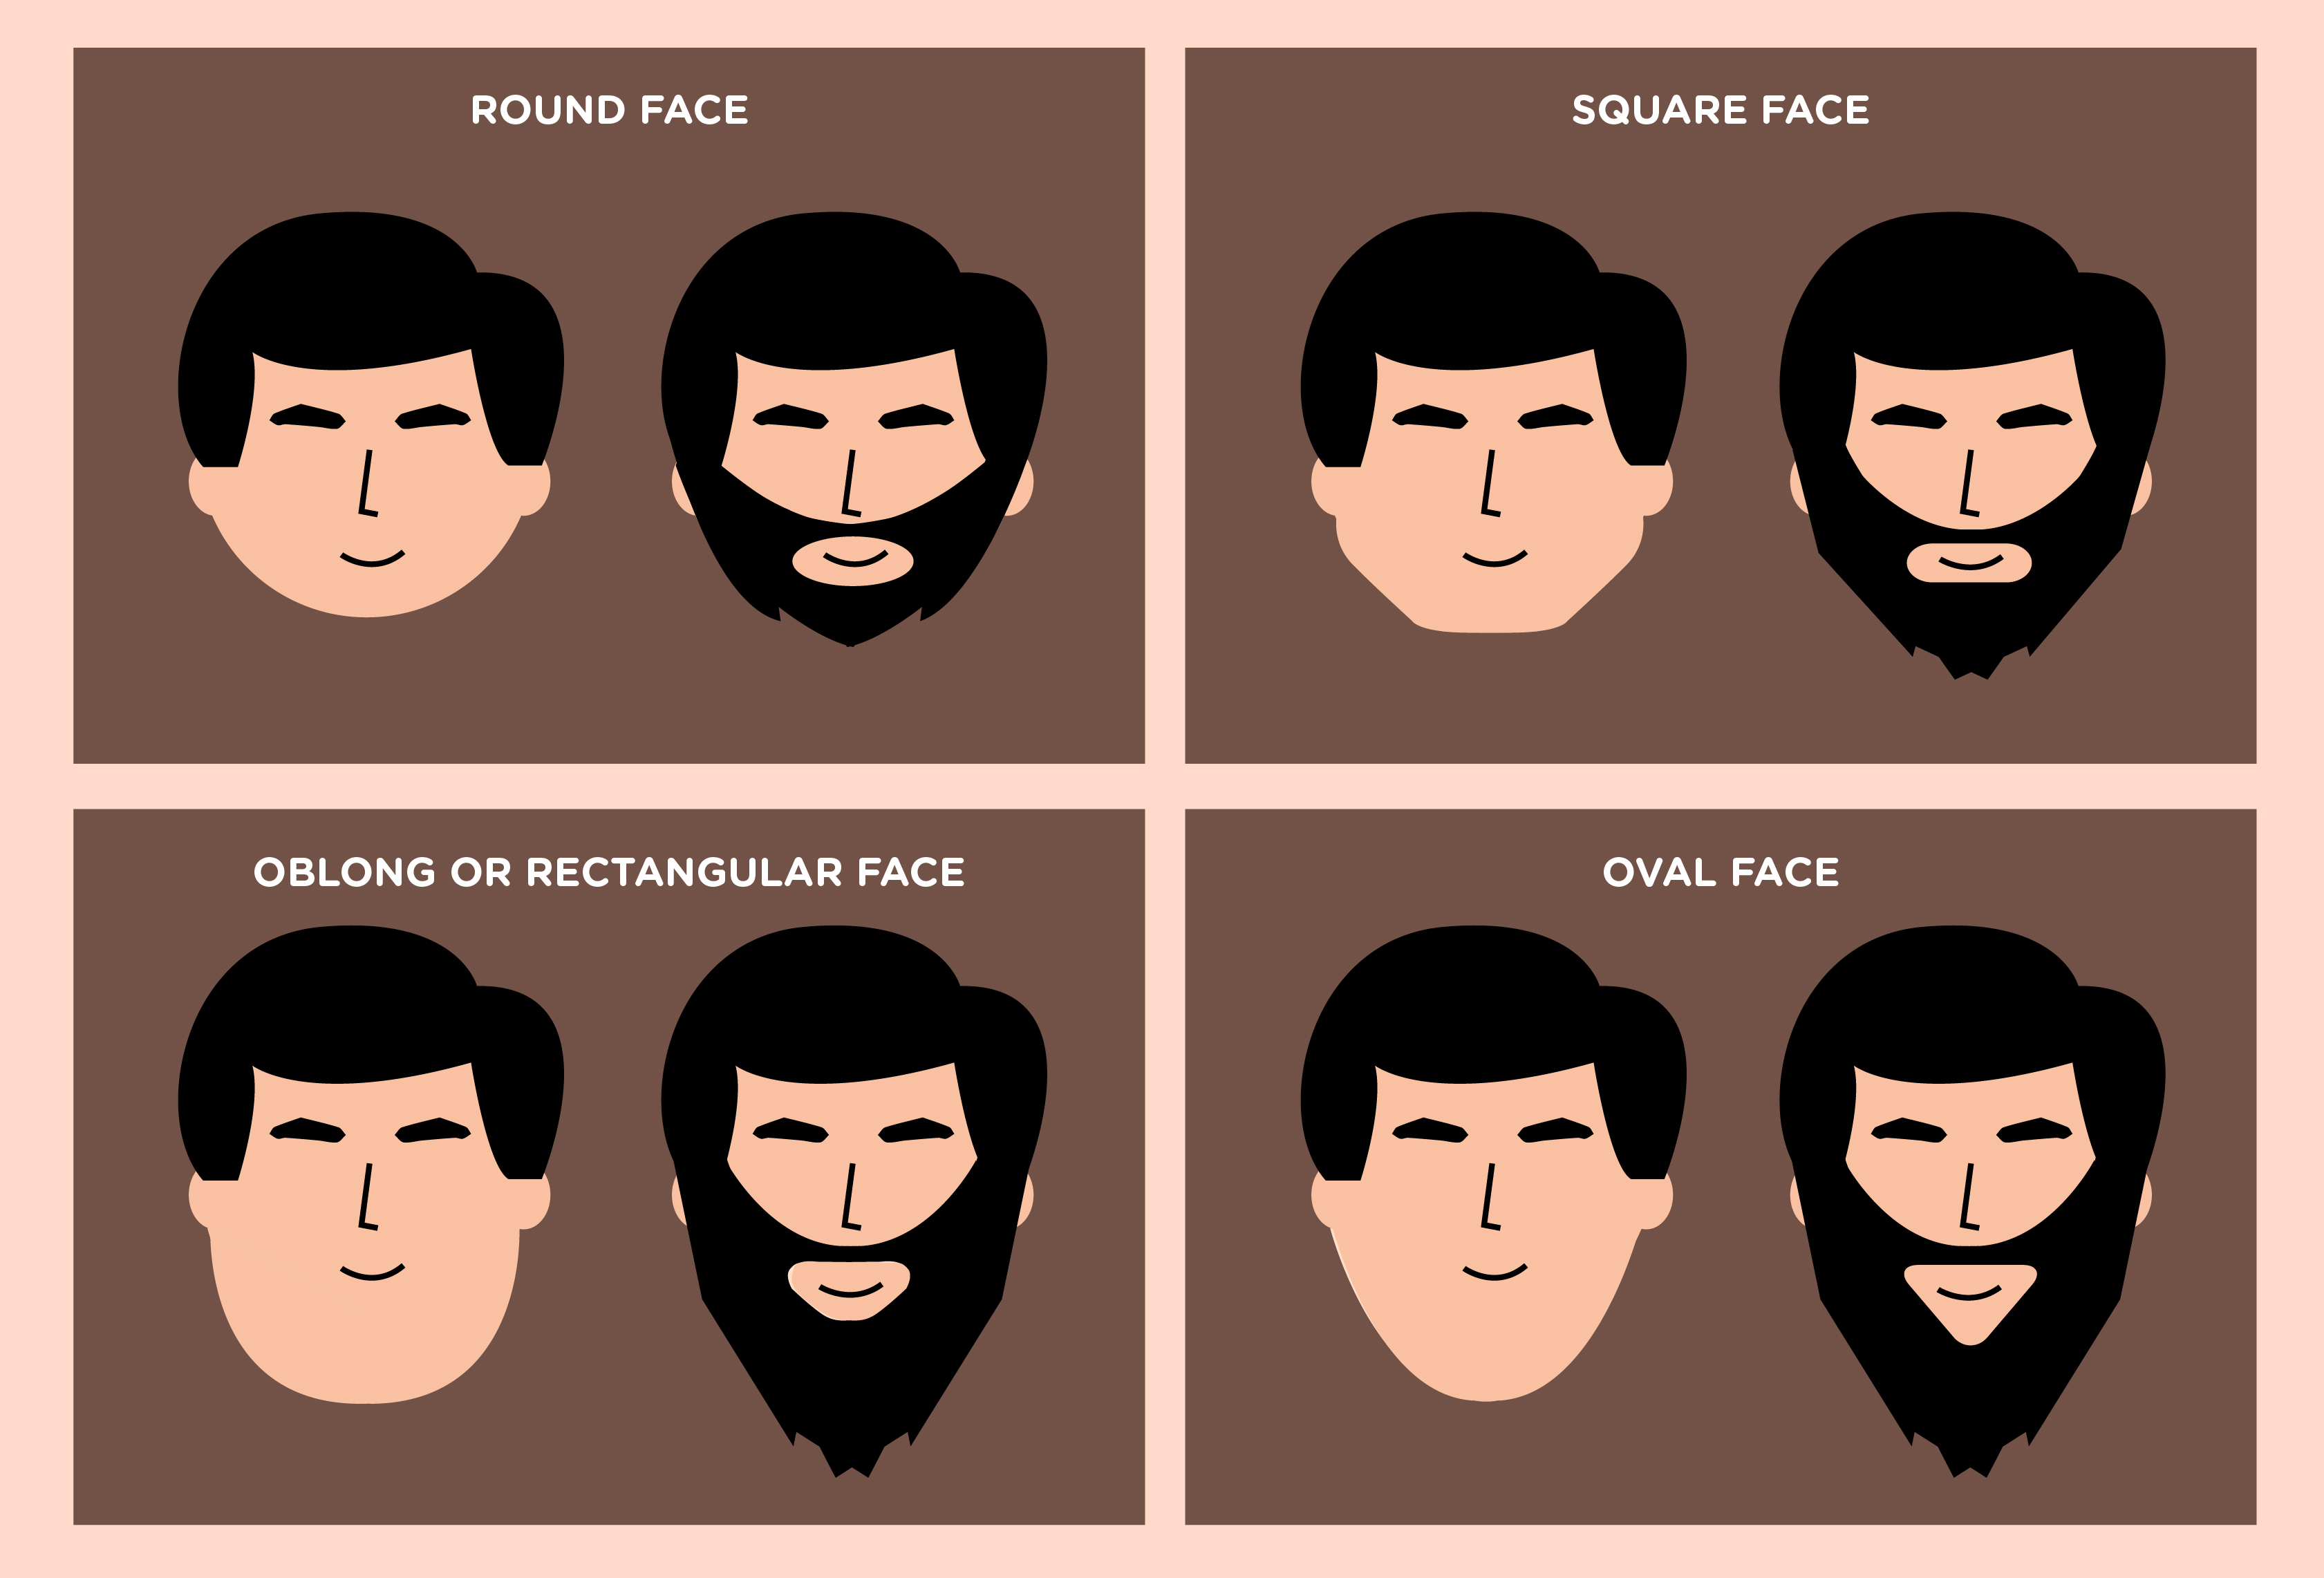 8 Beard Grooming Tips For The Dapper Gentleman - Doctor Leather